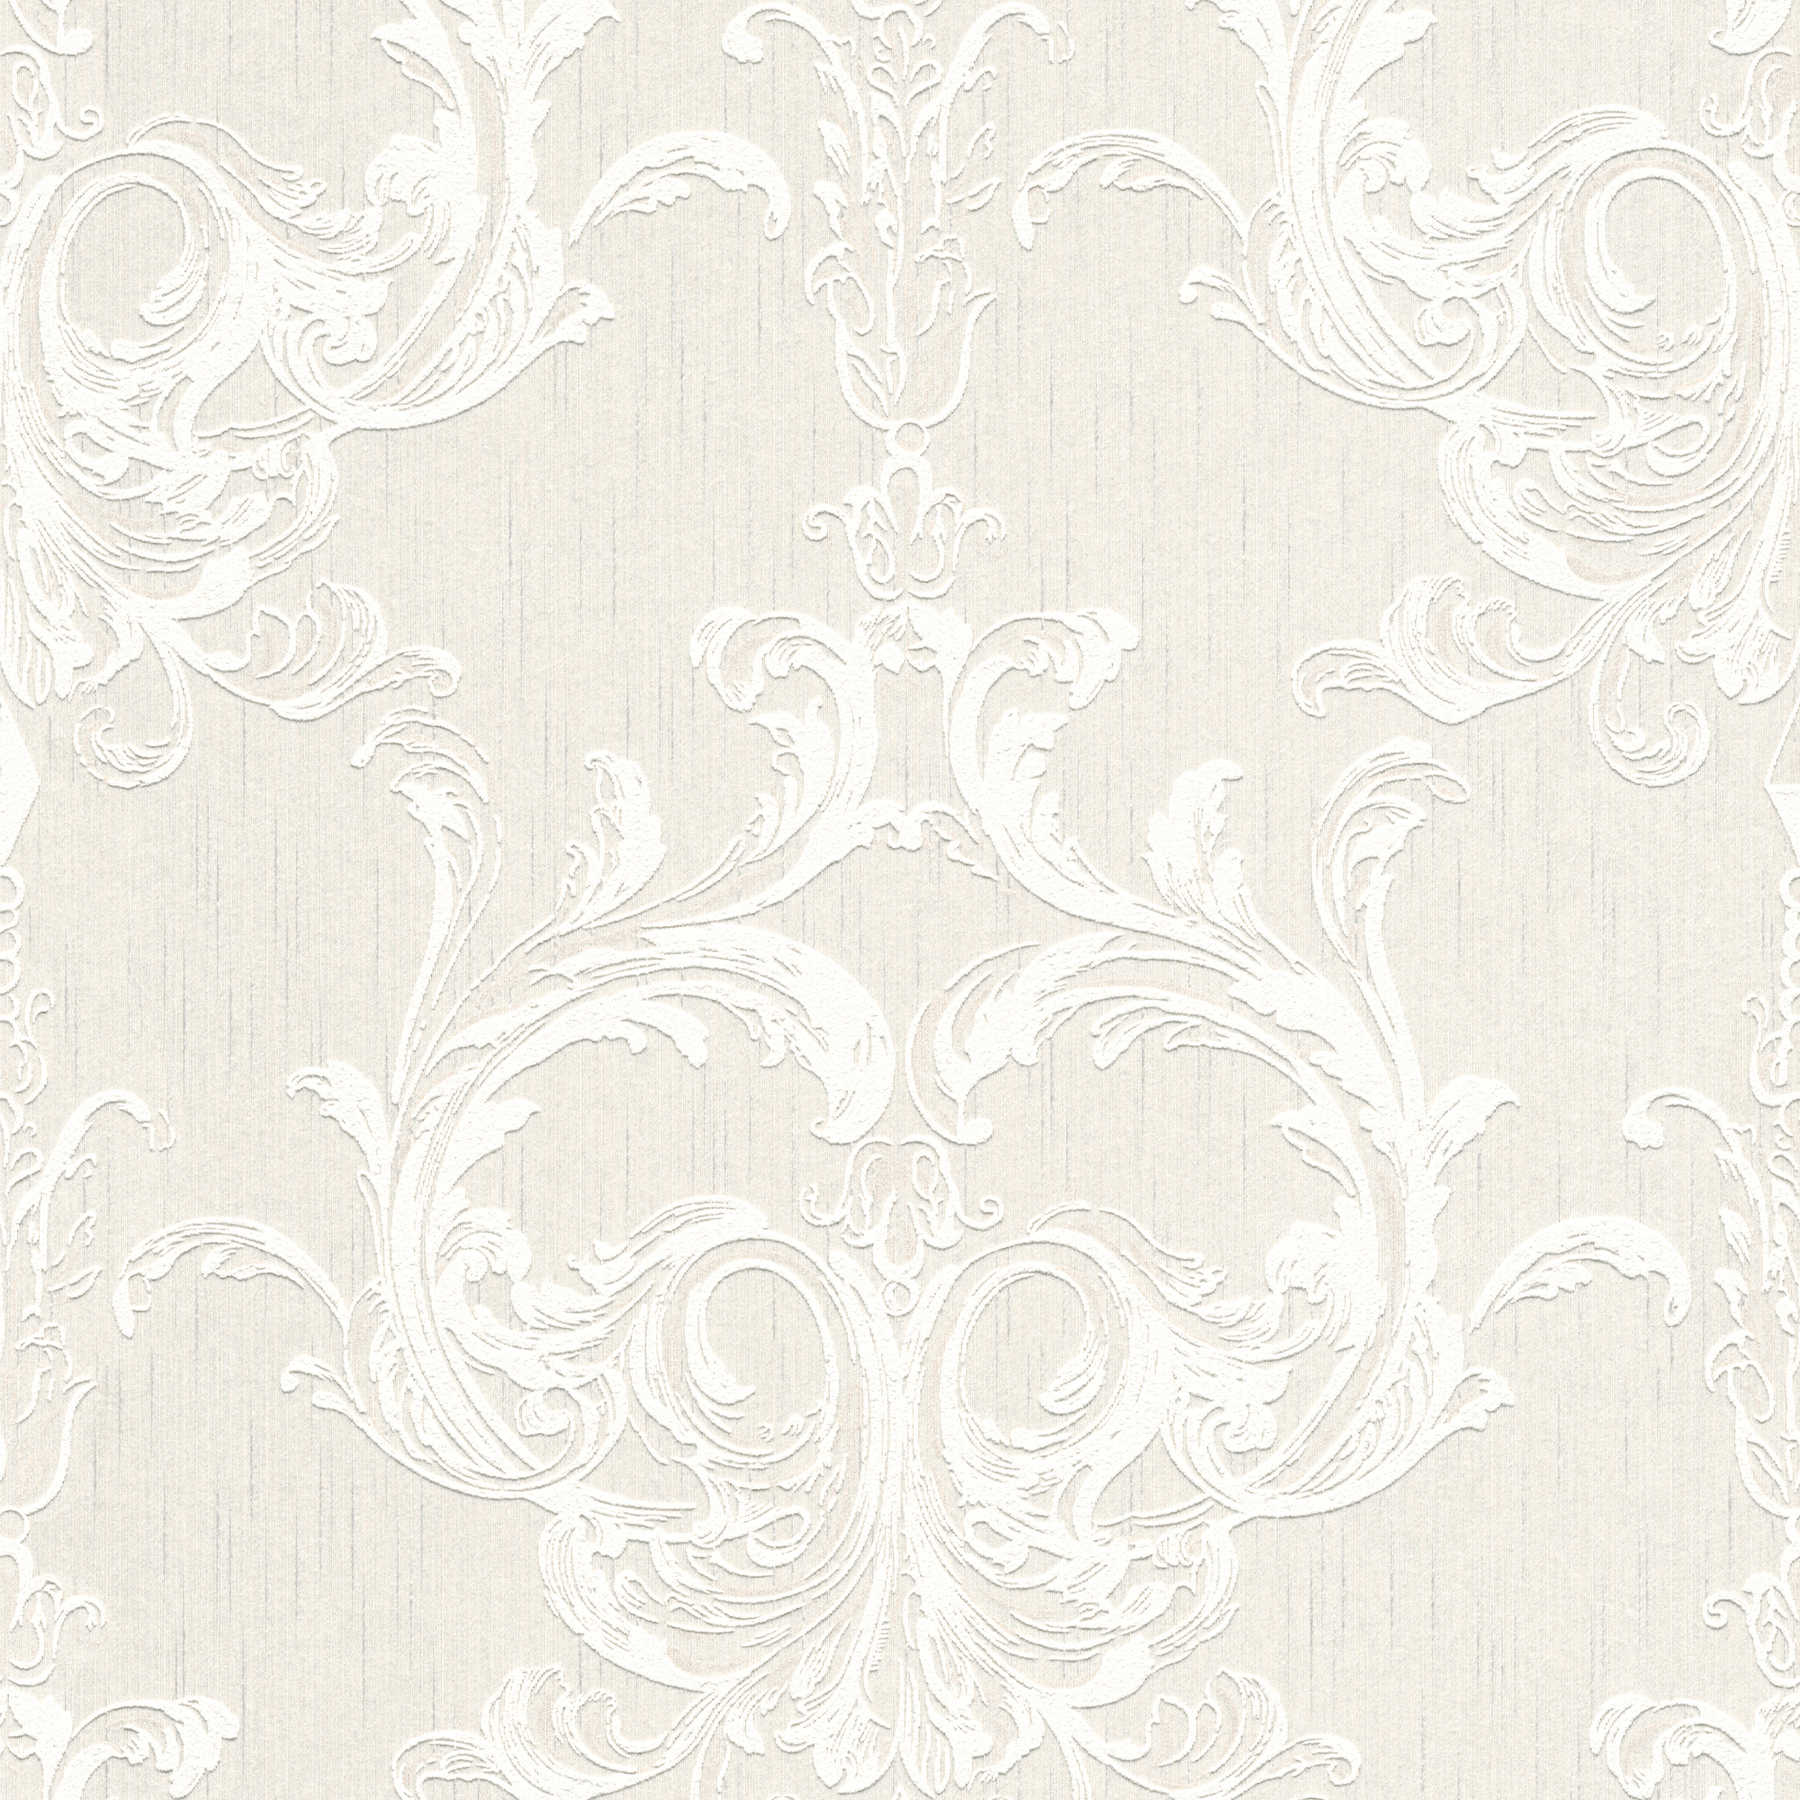         Wallpaper large ornaments with structural pattern - cream
    